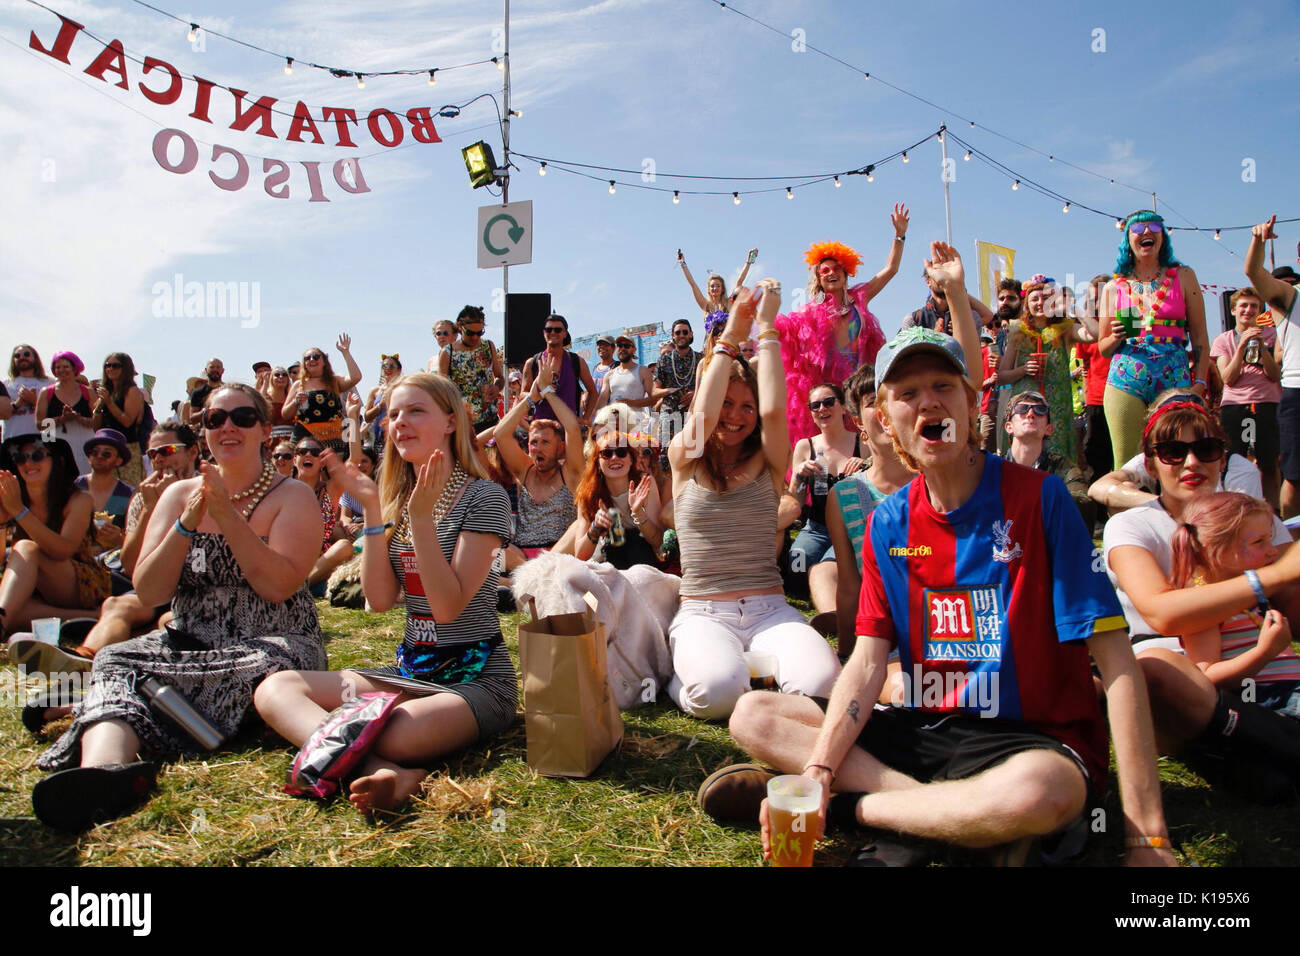 Northampton, UK. 25th August, 2017. The alternative festival famed for authentic music, crazy fancy dress and enthusiastic energy continues today under sunny skies on the Kelmarsh Estate. Credit: Wayne Farrell/Alamy Live News Stock Photo